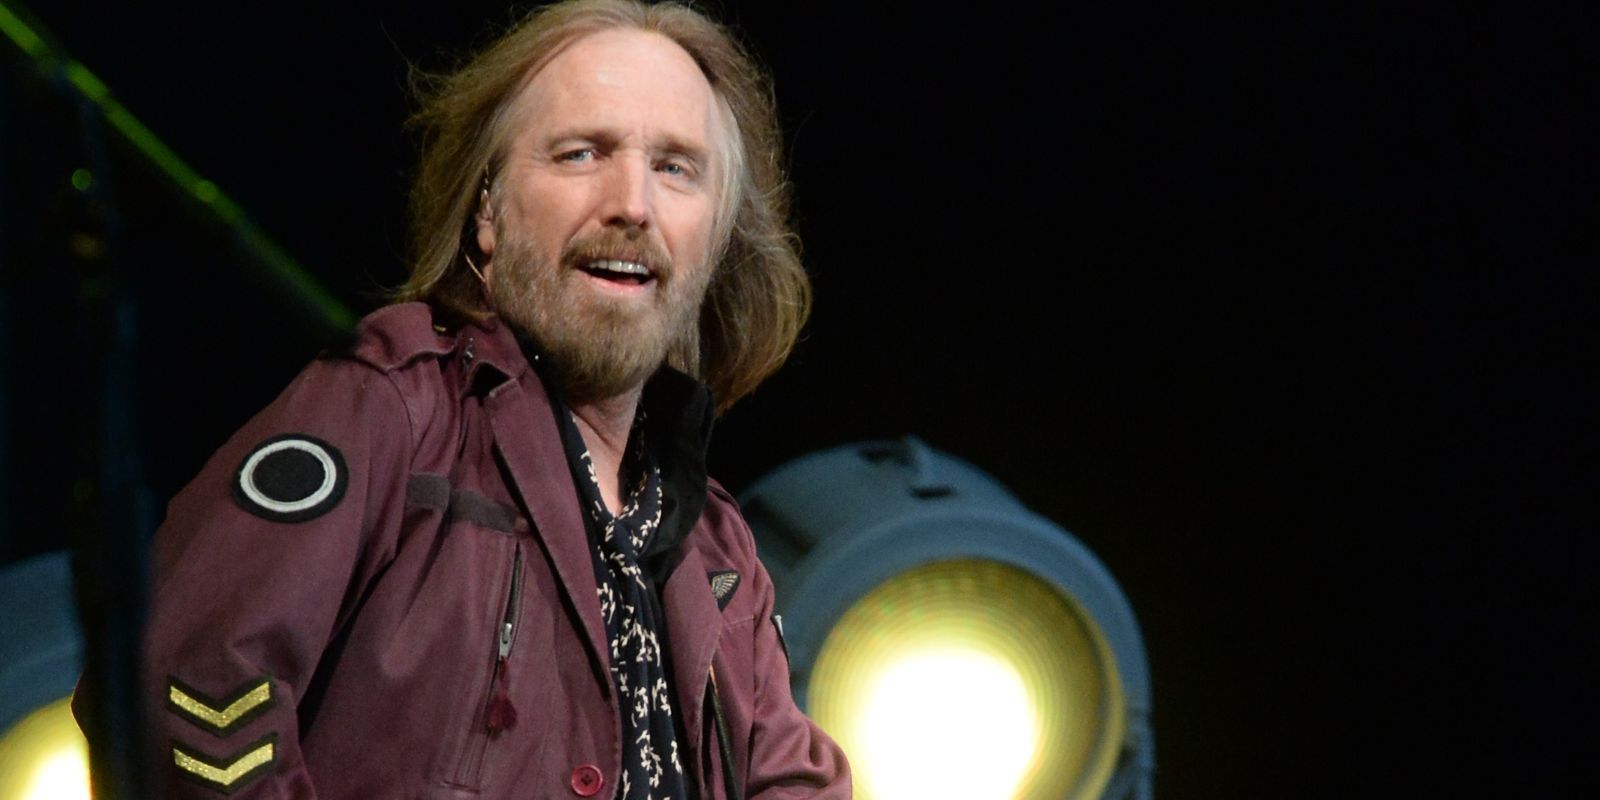 Rockers react to sad news about Tom Petty's death